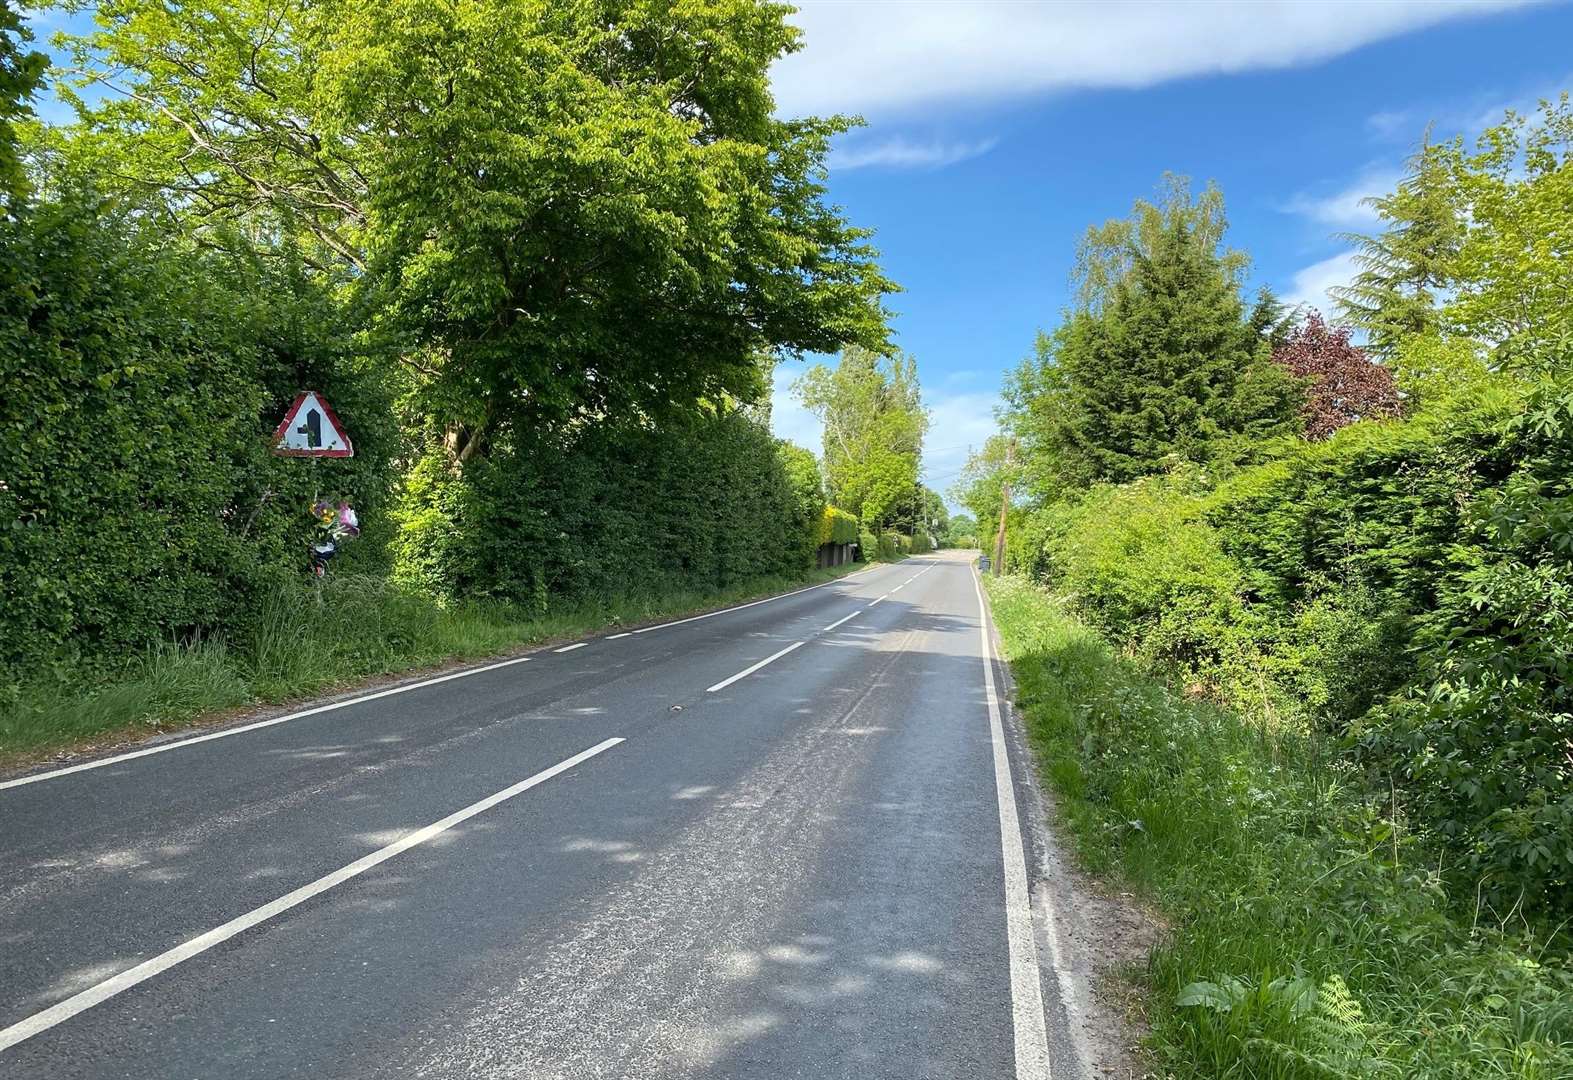 The A262 Sissinghurst Road. Picture: Barry Goodwin